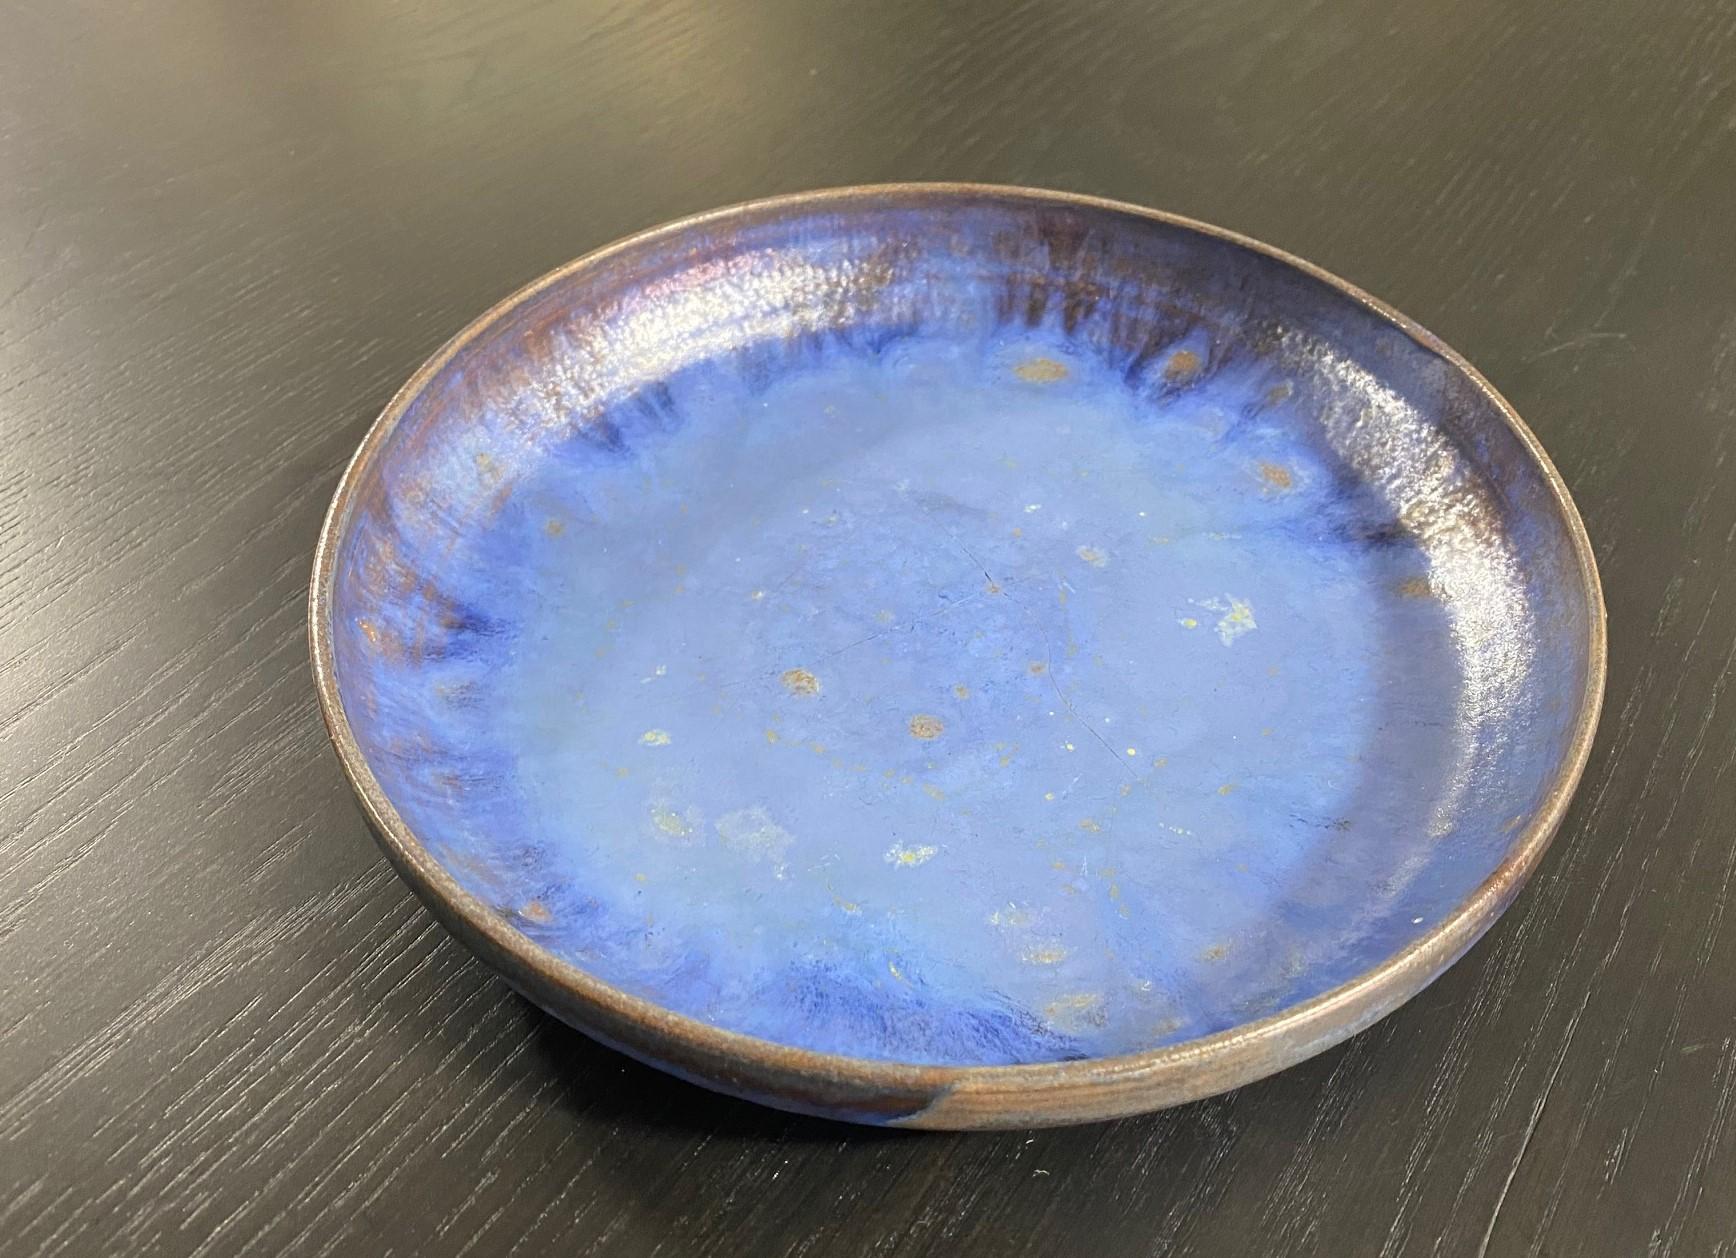 Famed California Mid-Century Modern artist Beatrice wood signed bowl featuring her highly coveted deep ash blue iridescent lustre/luster glaze. In certain light, the glaze radiates as a purple hue in some areas. The glaze runs down the sides and